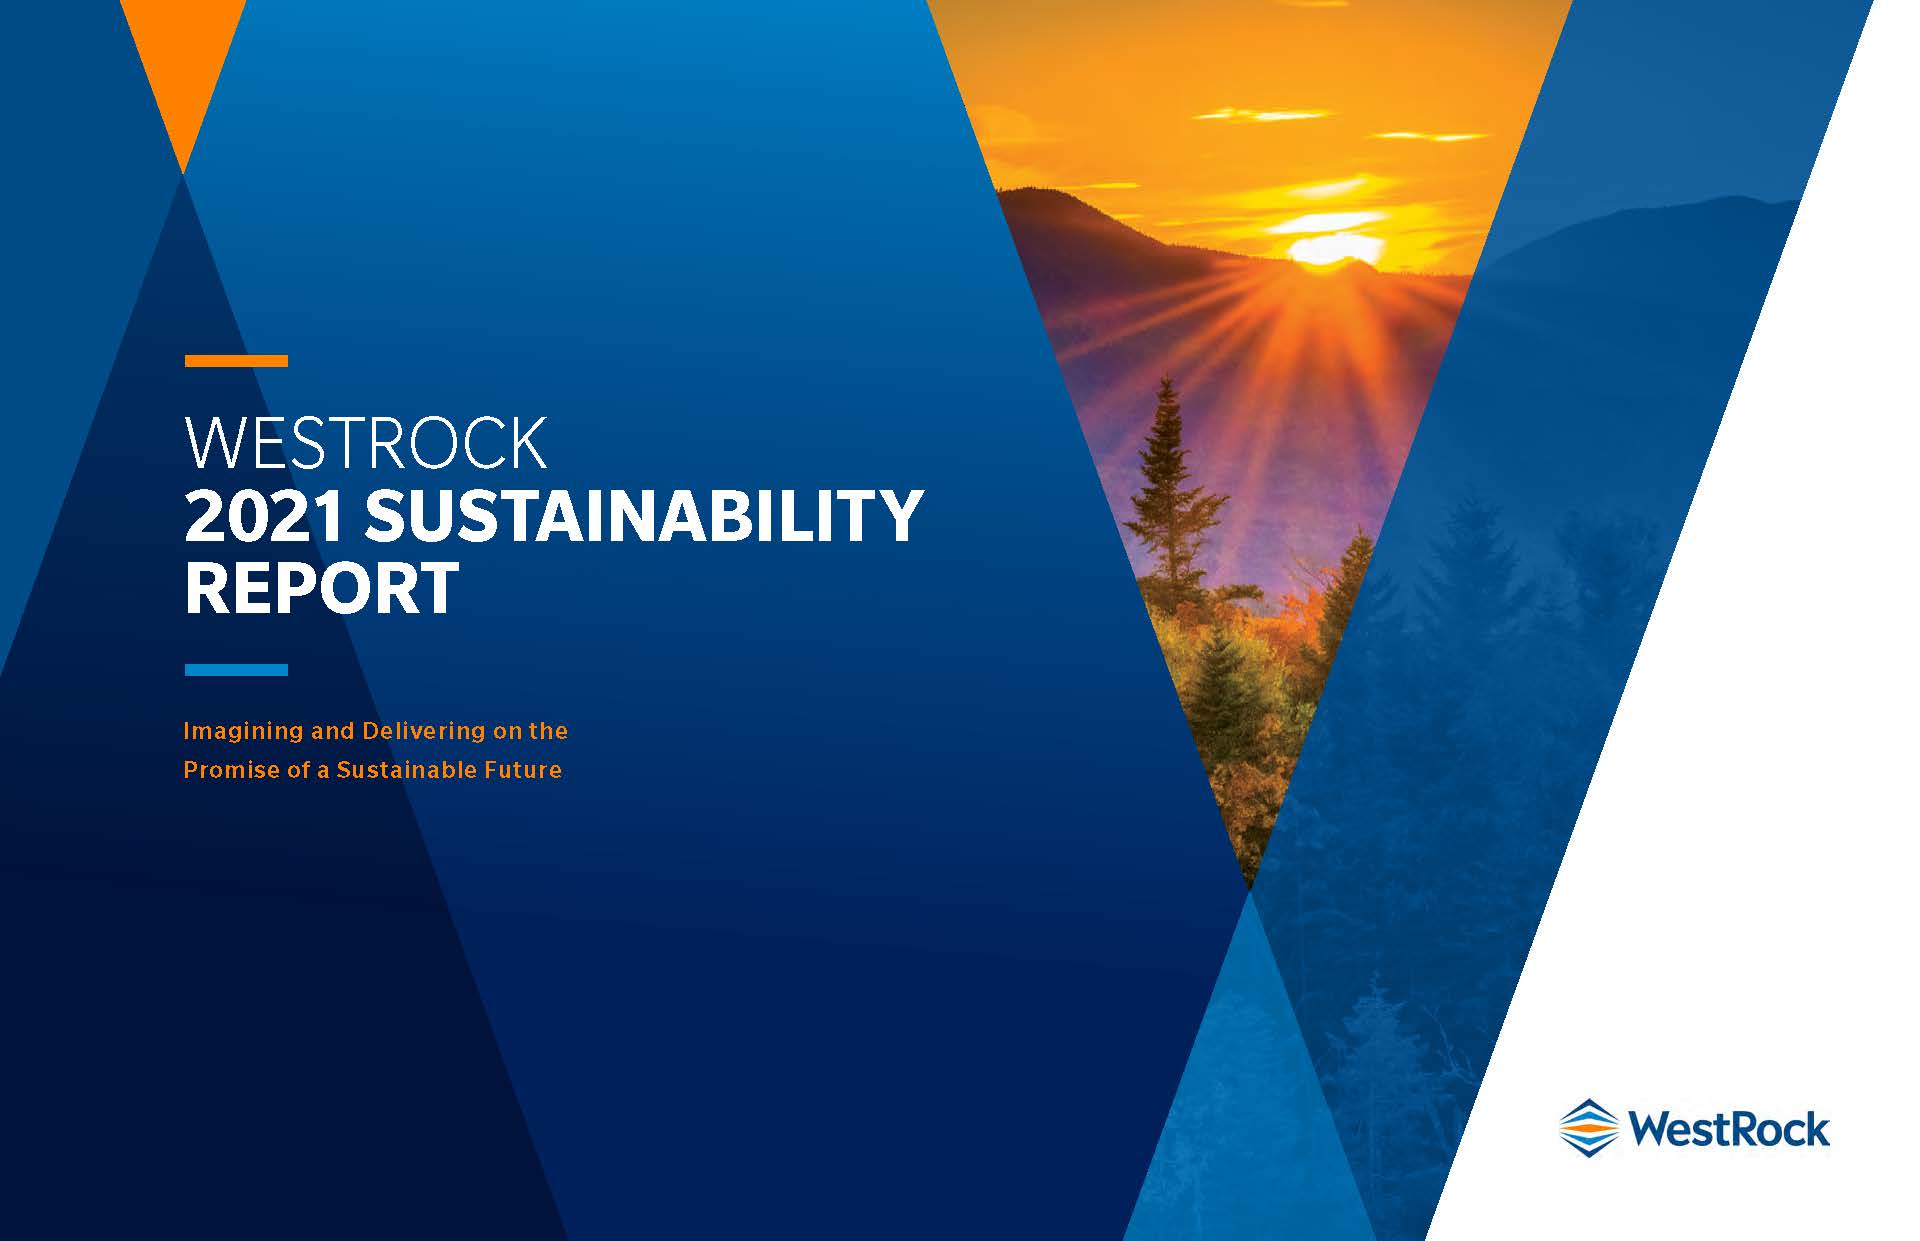 WestRock 2021 Sustainability Report cover with logo